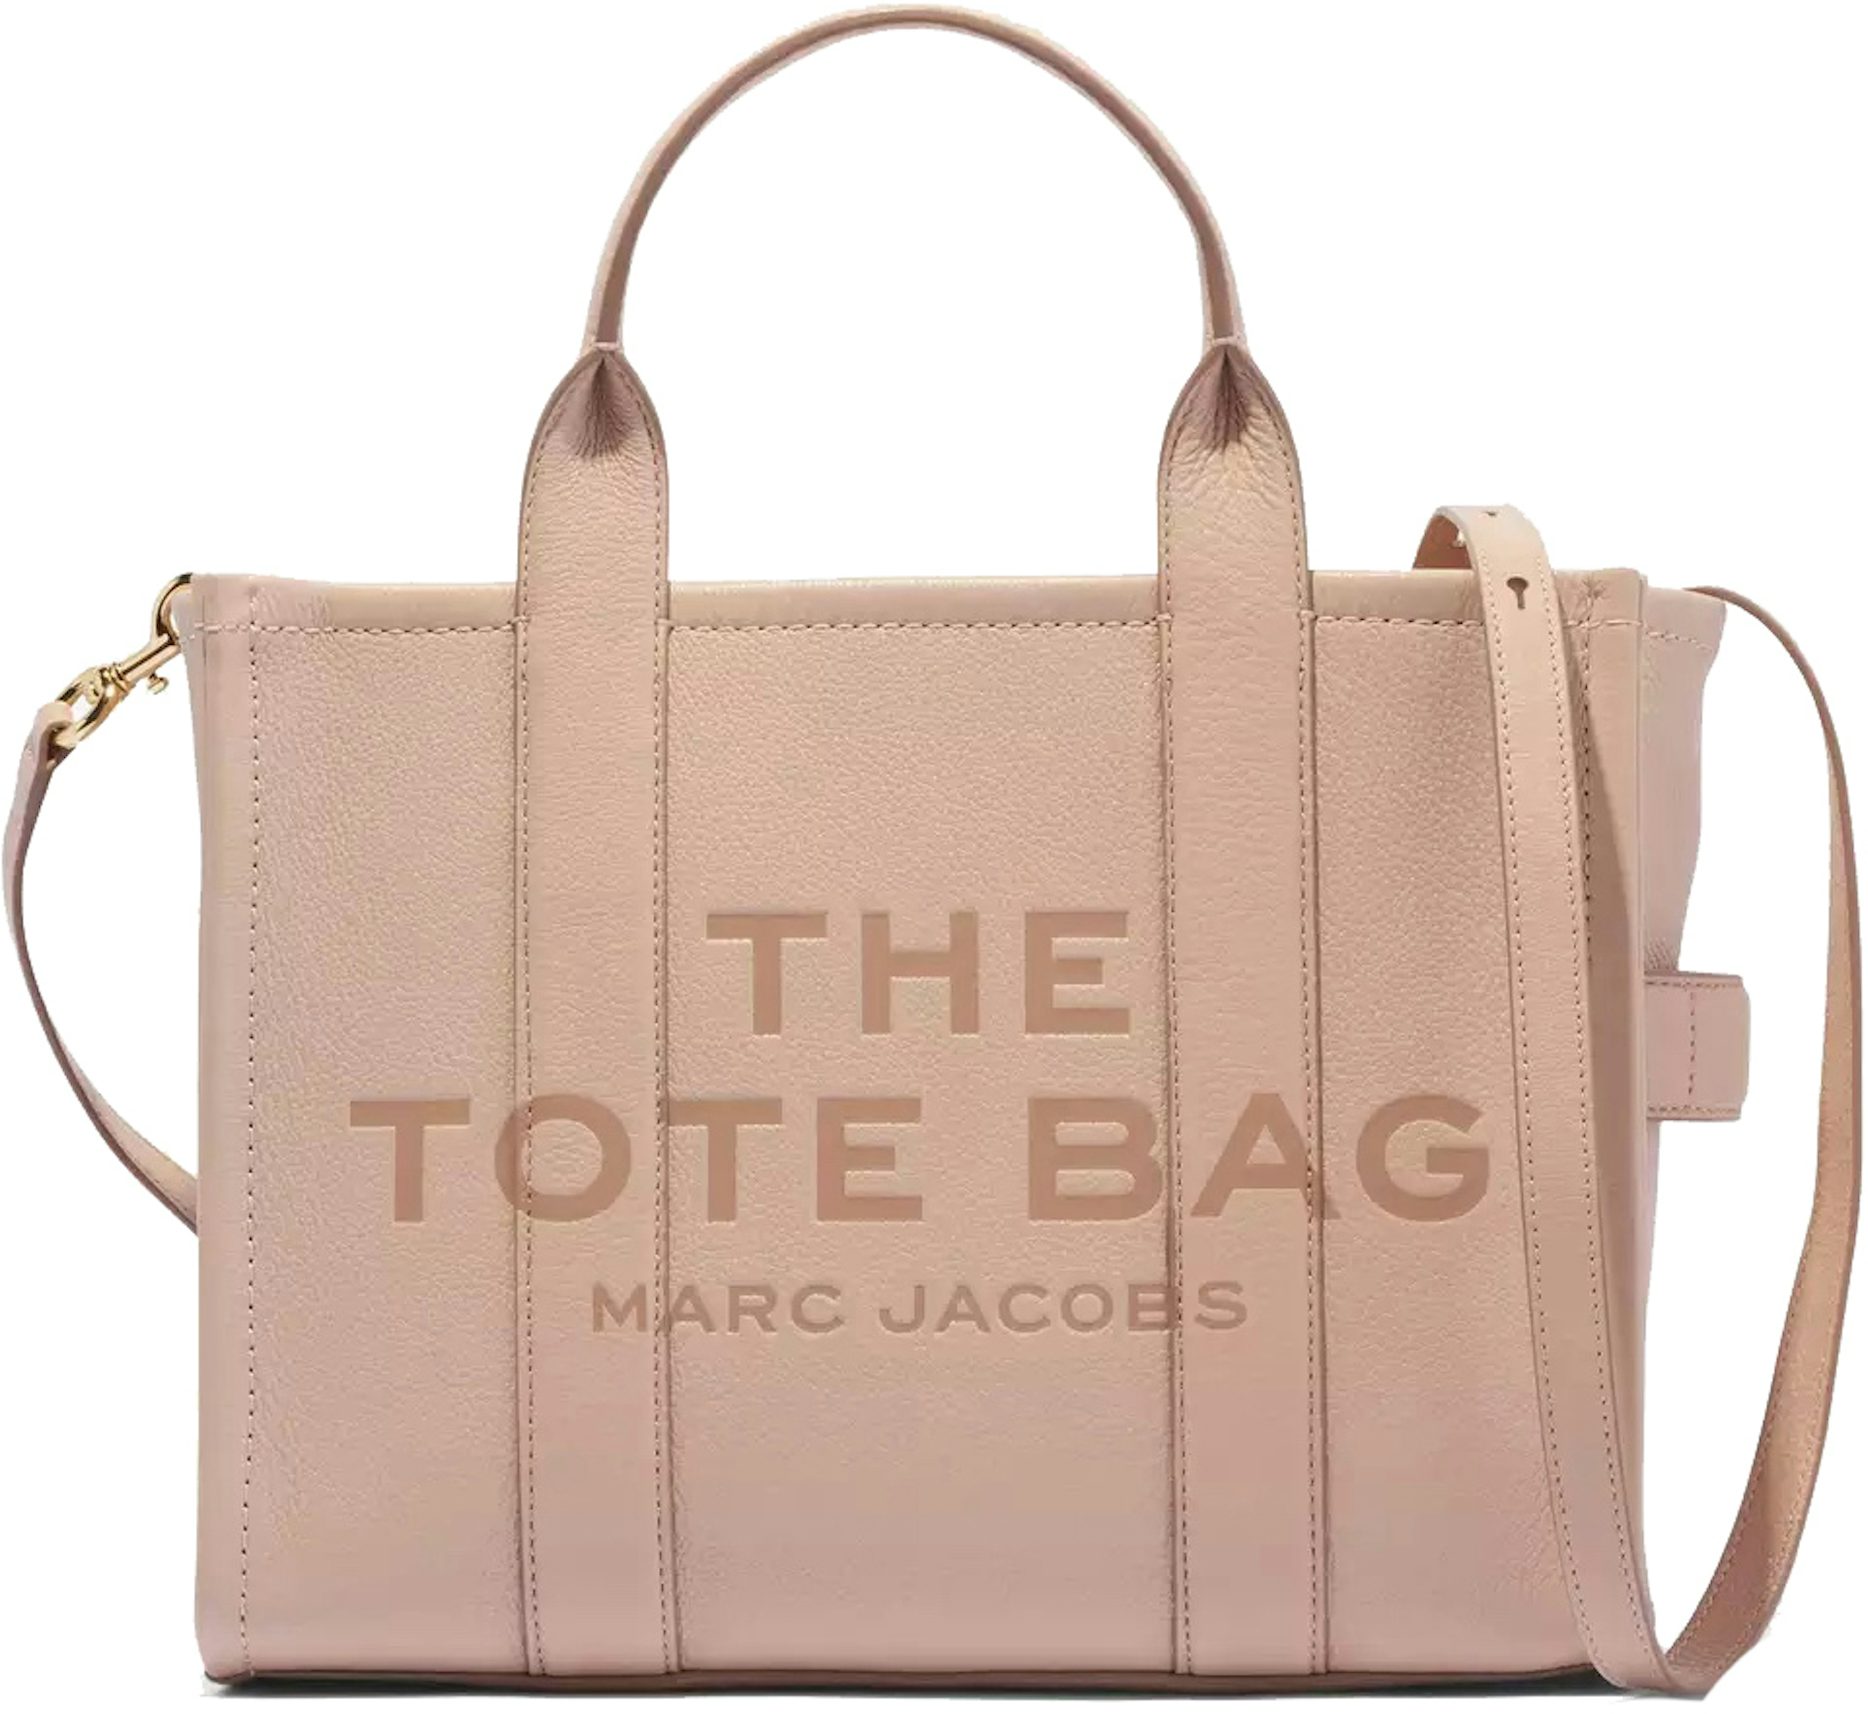 Marc Jacobs The Mini Leather Tote Bag - Rose Dust